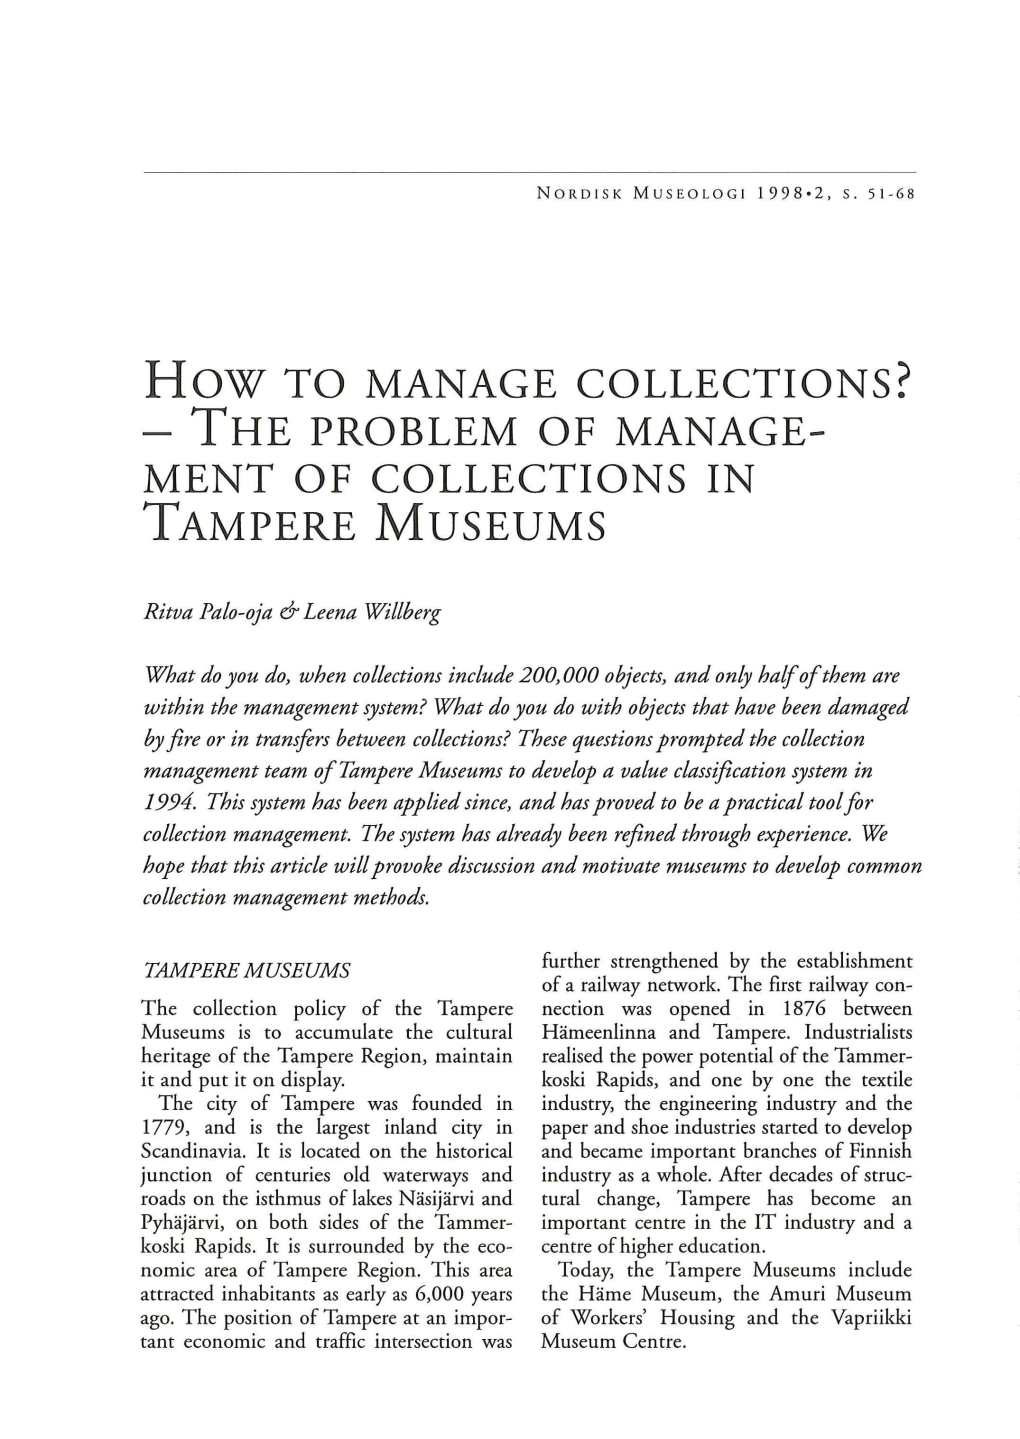 Ment of Collections in Tampere Museums